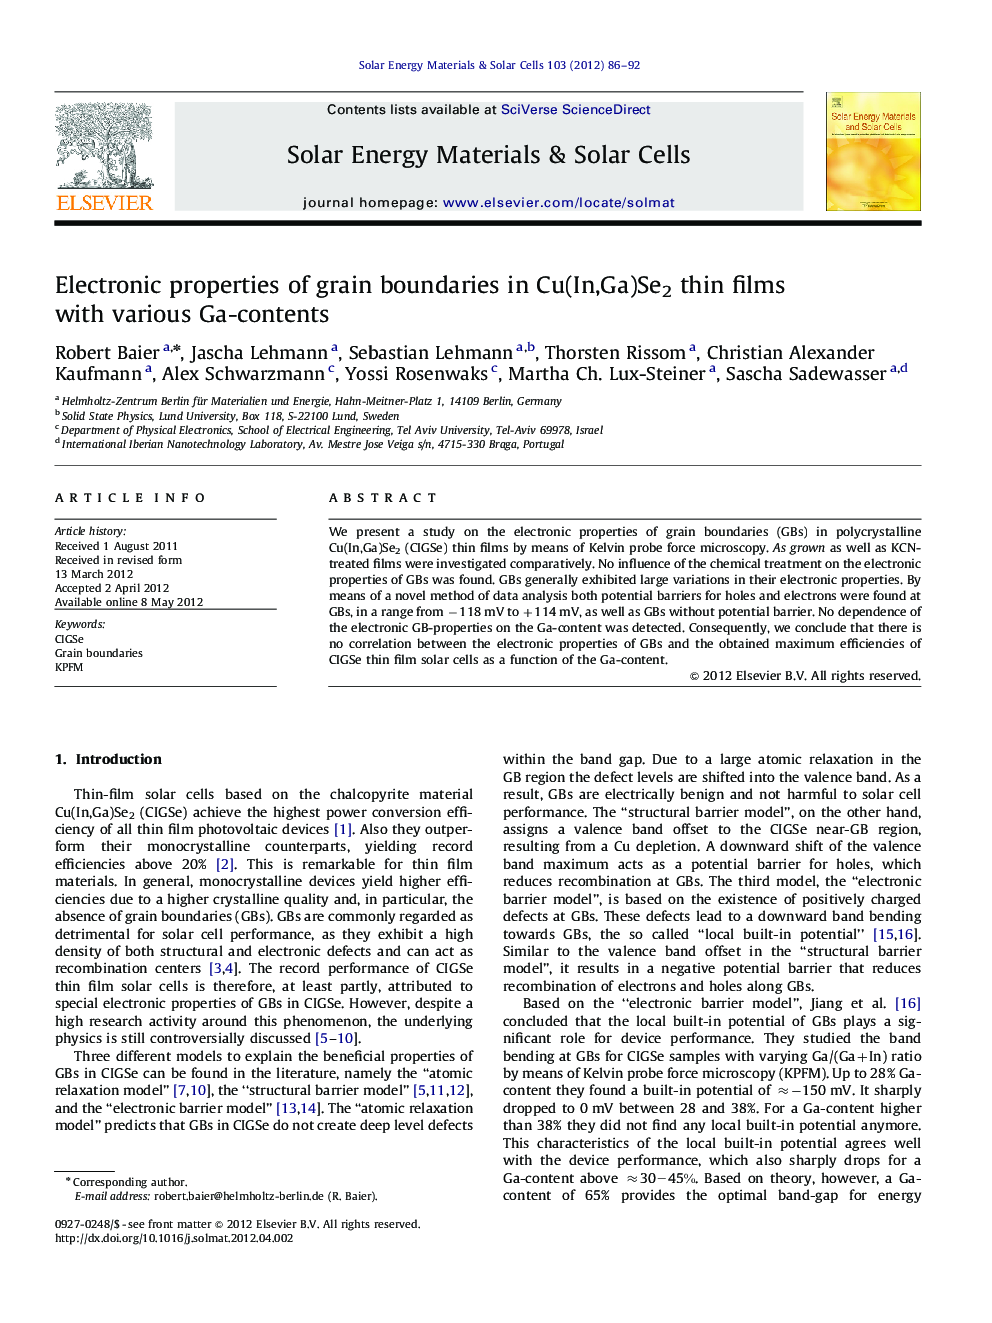 Electronic properties of grain boundaries in Cu(In,Ga)Se2 thin films with various Ga-contents